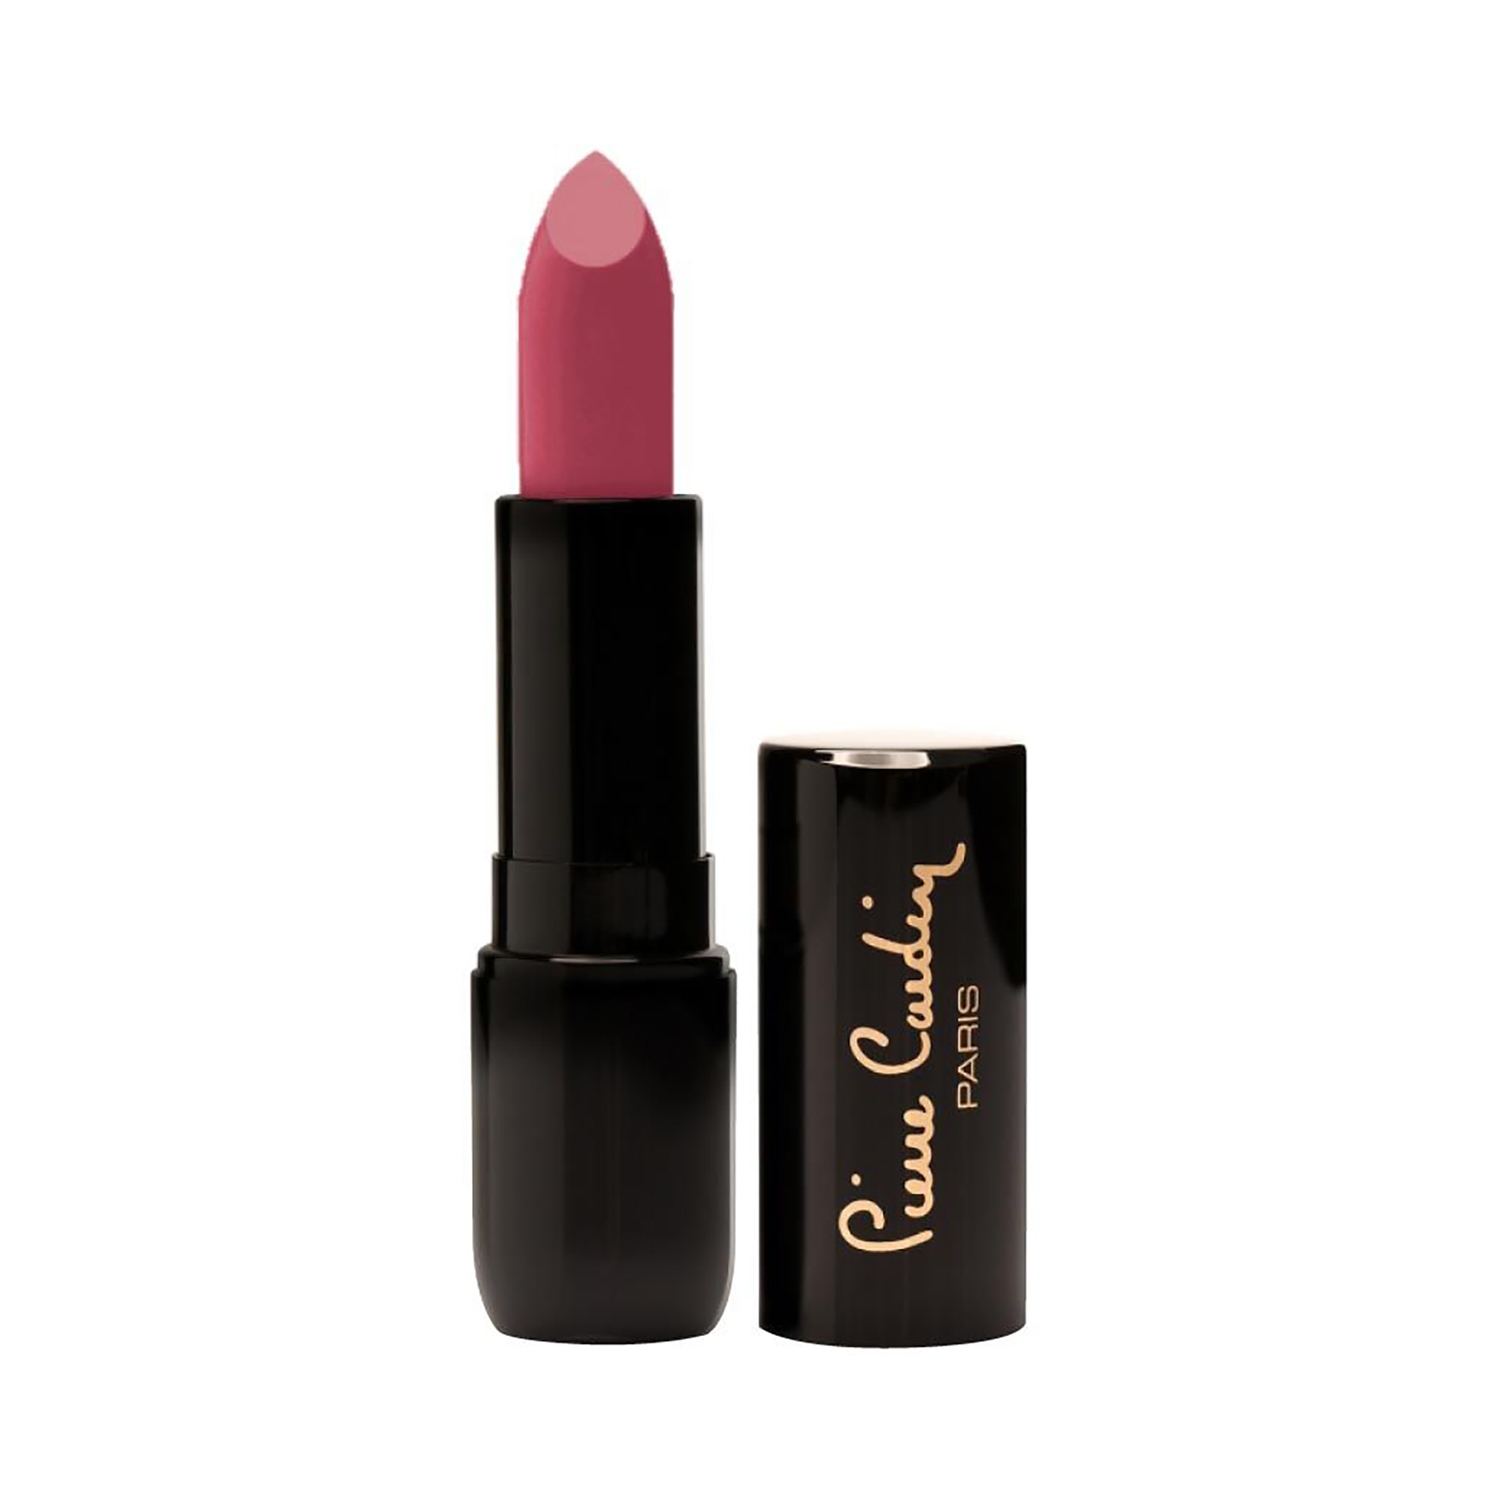 Pierre Cardin Paris | Pierre Cardin Paris Porcelain Edition Rouge Lipstick - 238 Deep Red (4g)